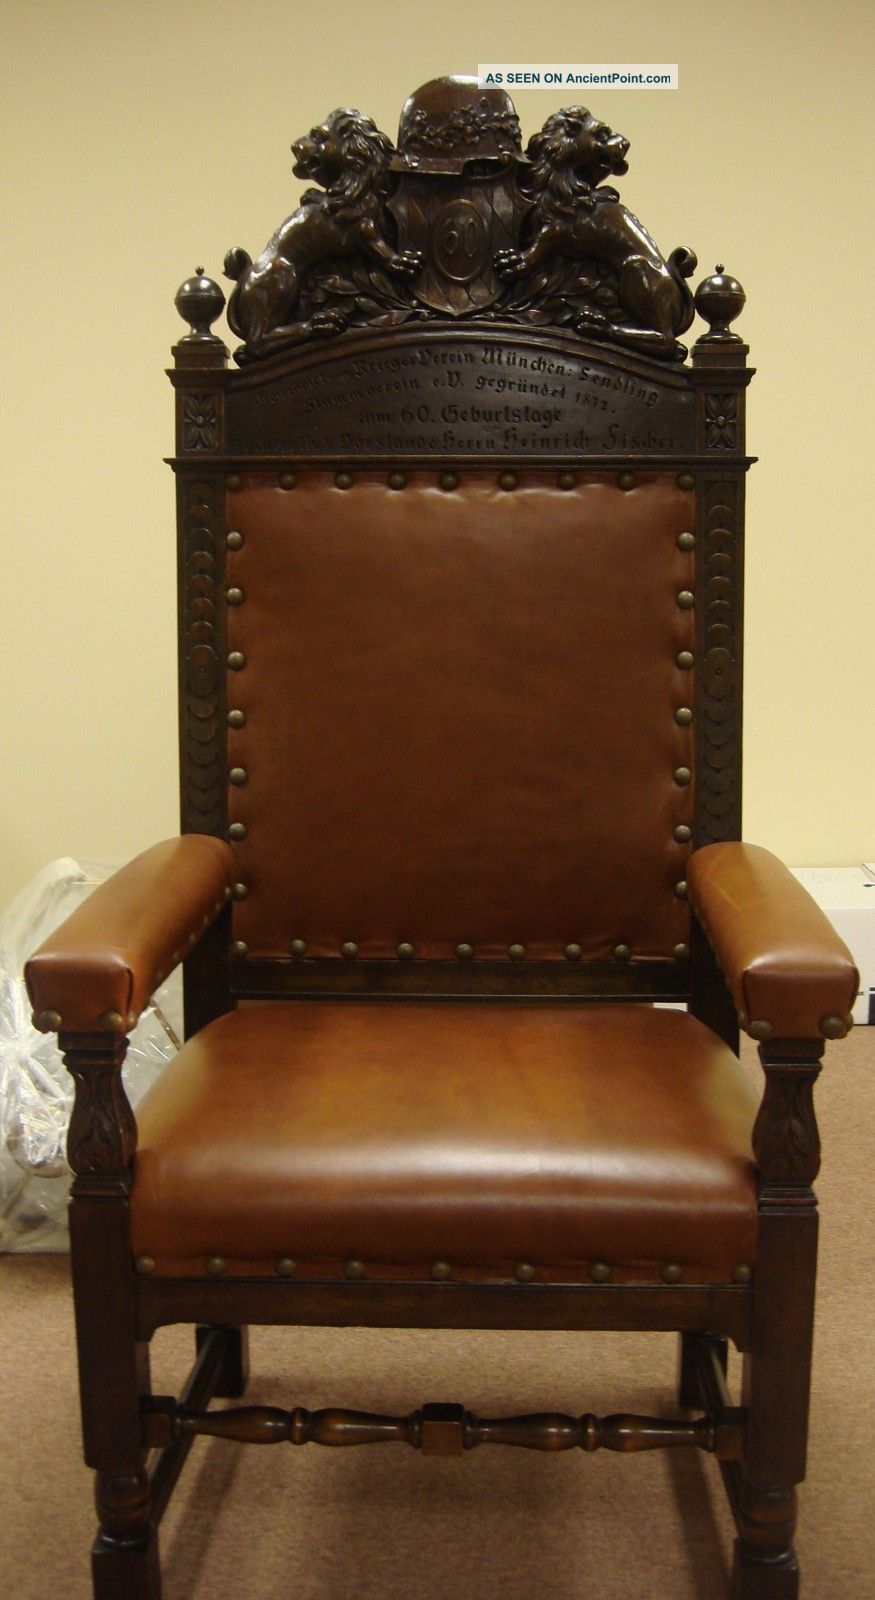 Historic German Chair To Honor Chairman Of Ww1 Vets Organization Of Munich 1900-1950 photo